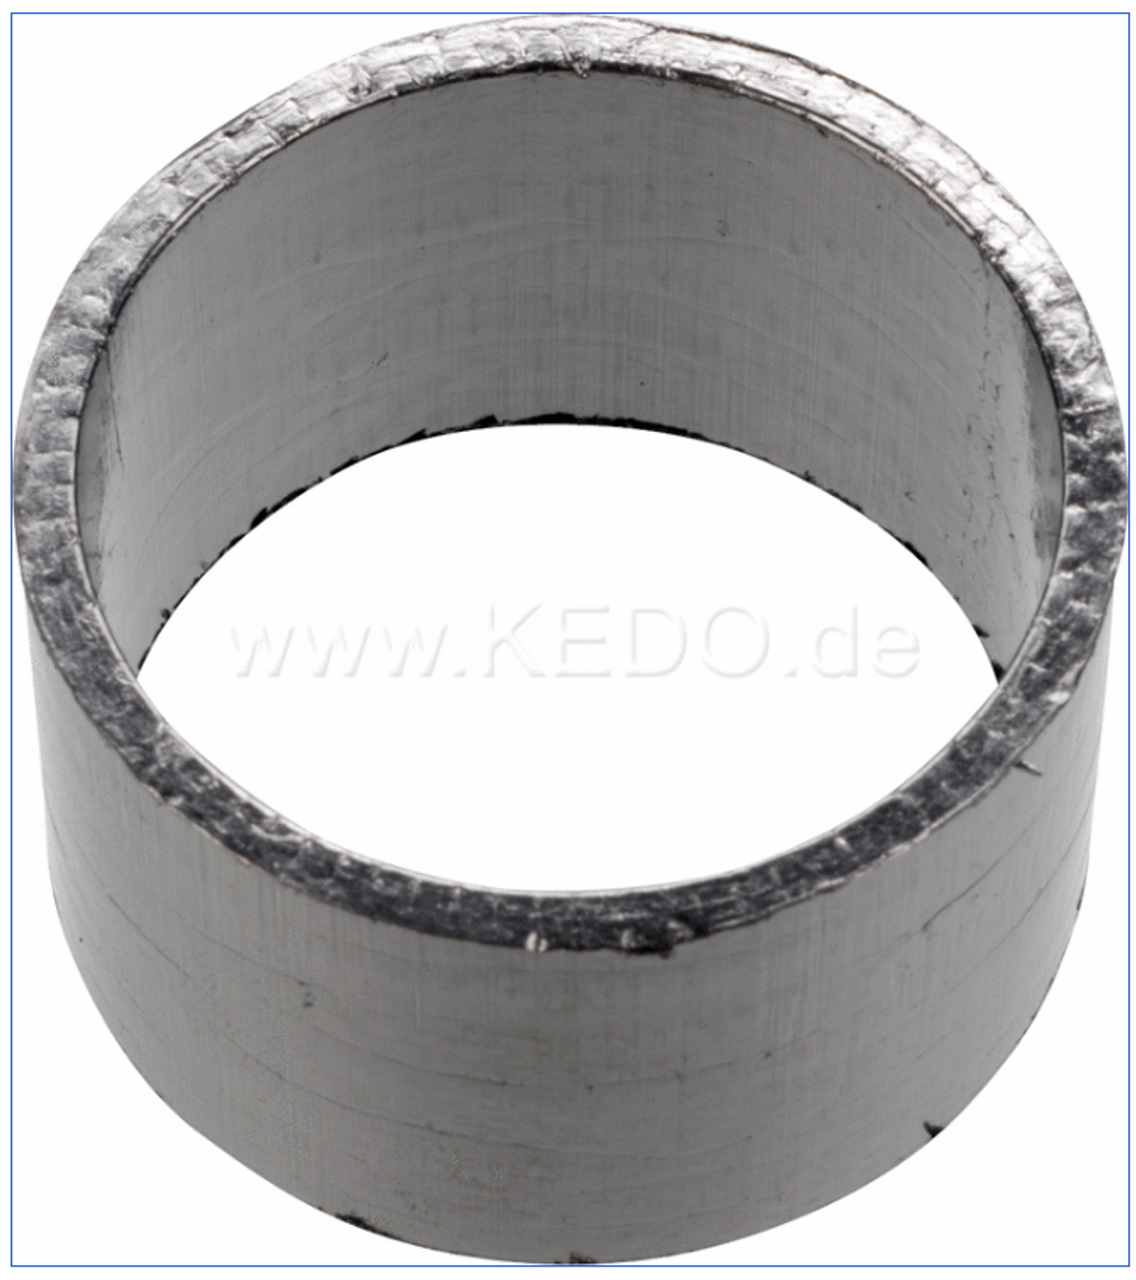 Header Pipe Gasket TT500 XT500, especially for header pipe with 38mm flange, size 38x43x26mm